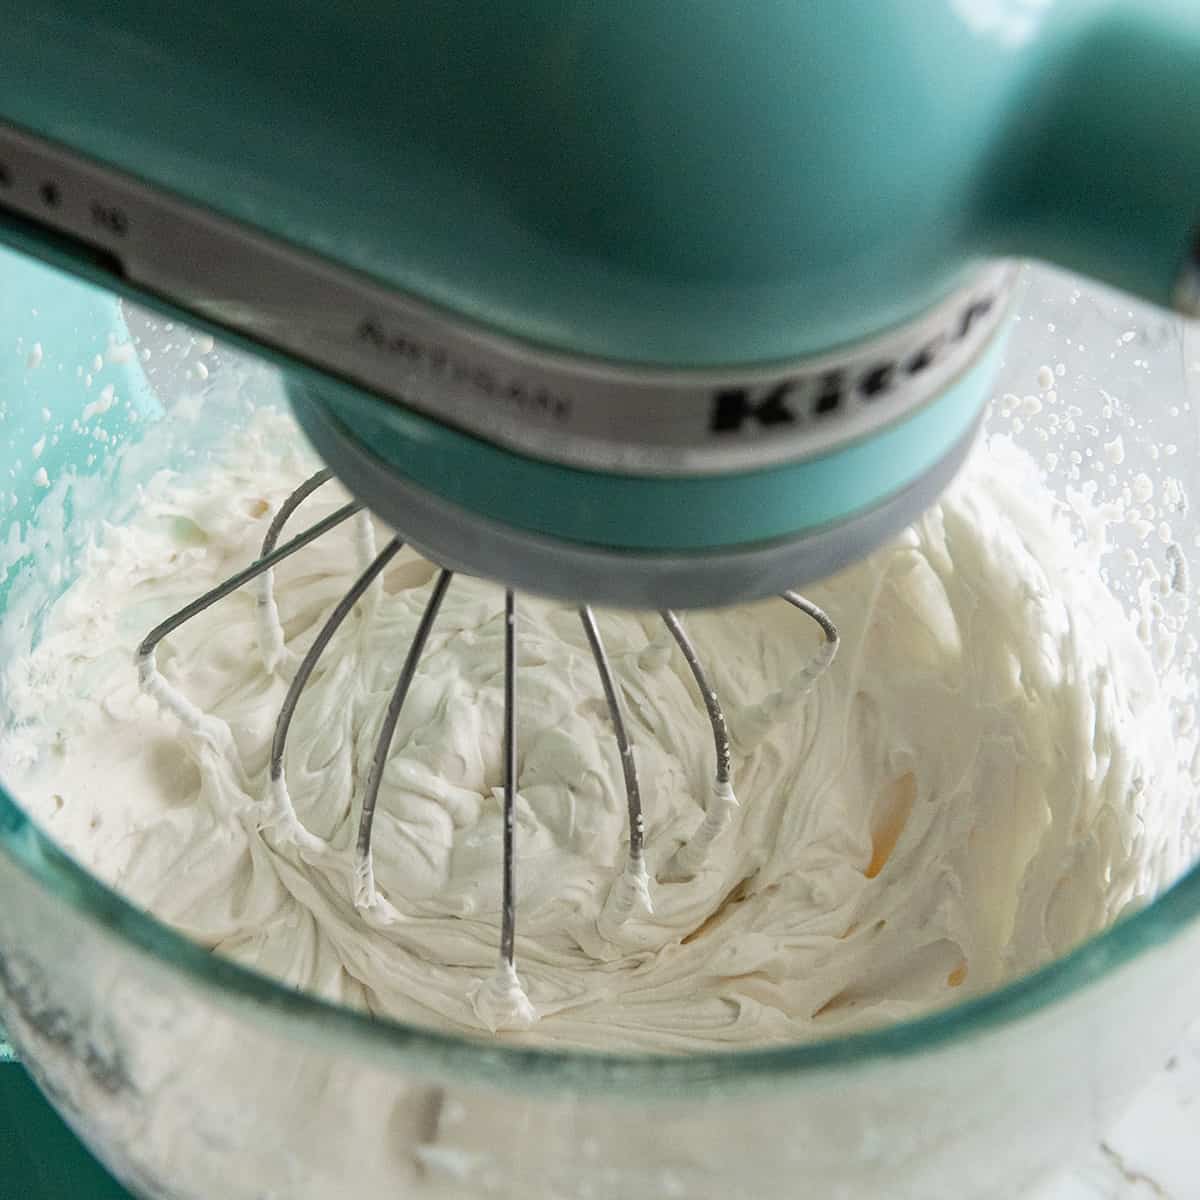 How to Make Whipped Cream - stiff peaks formed in a standing mixer fitted with the wire whisk attachment